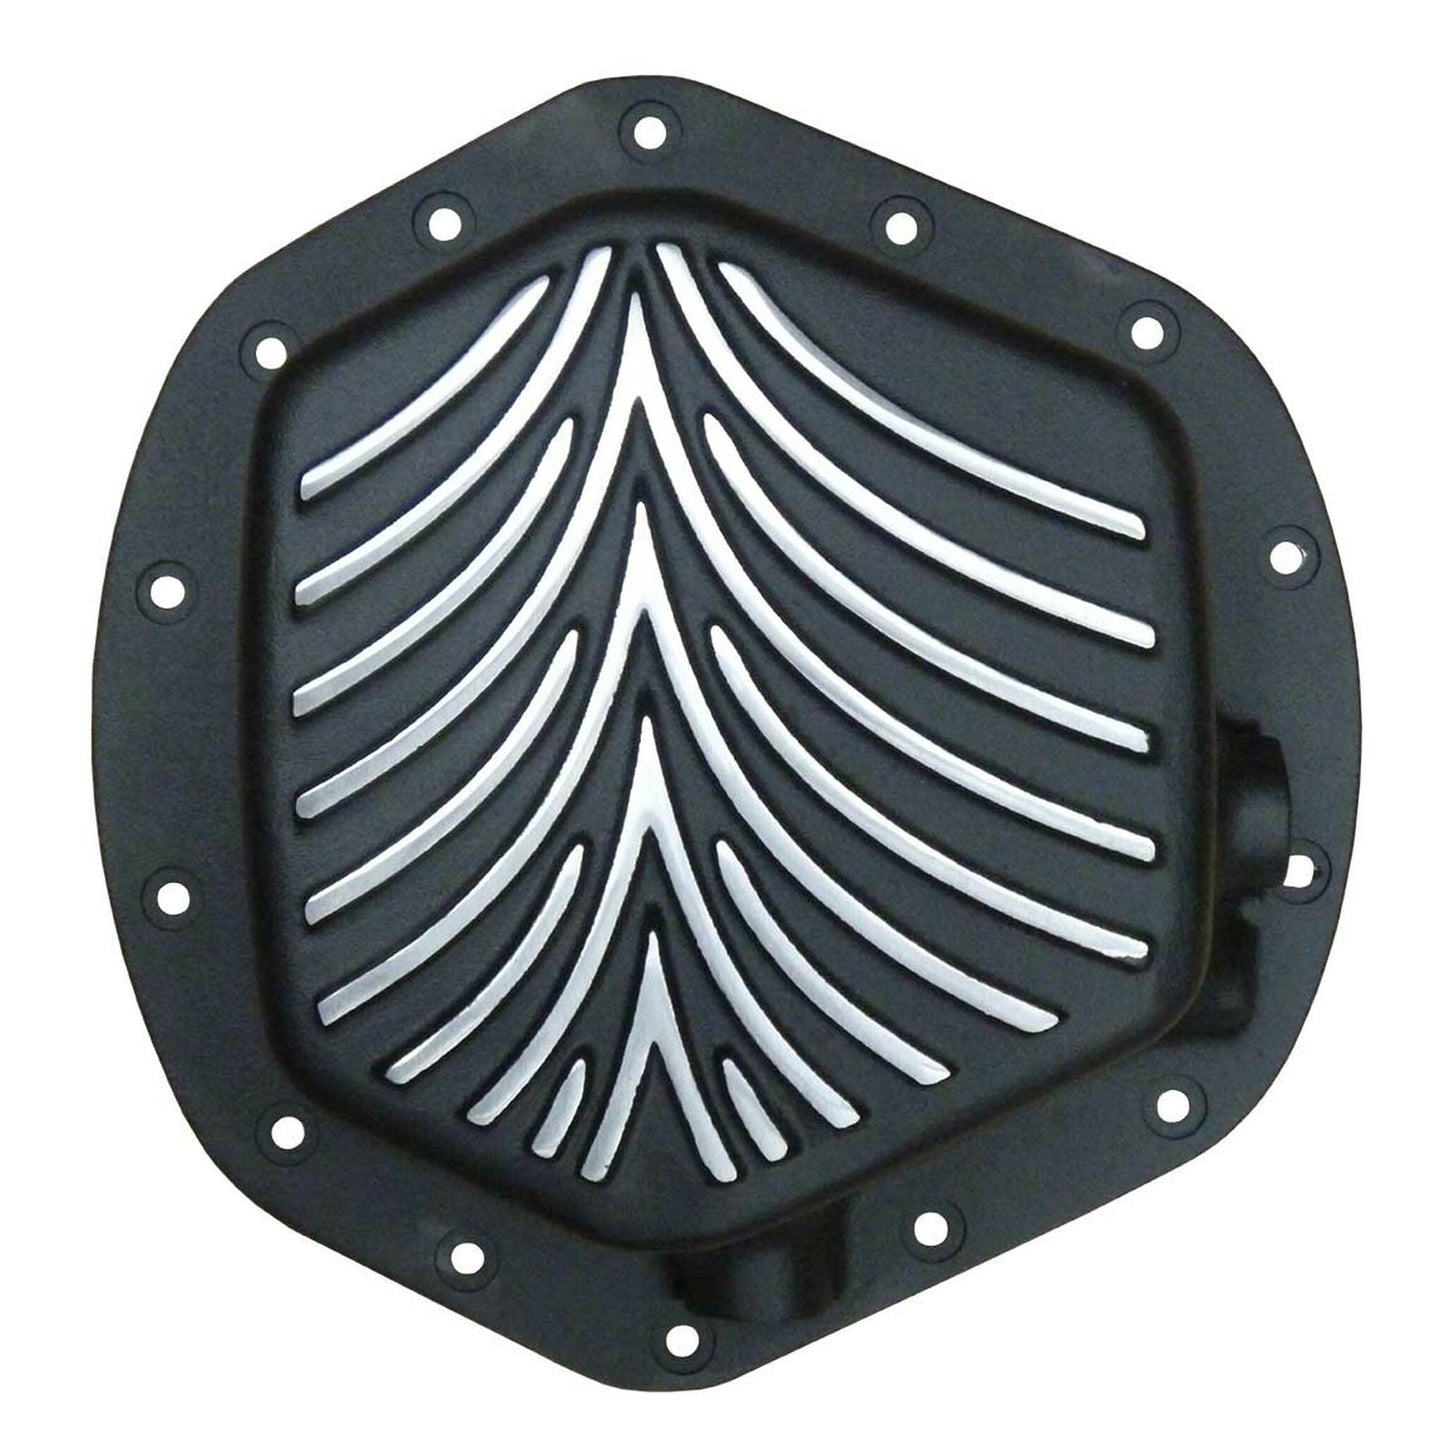 GM 8.5", 8.625" Differential Cover 2.875" Depth